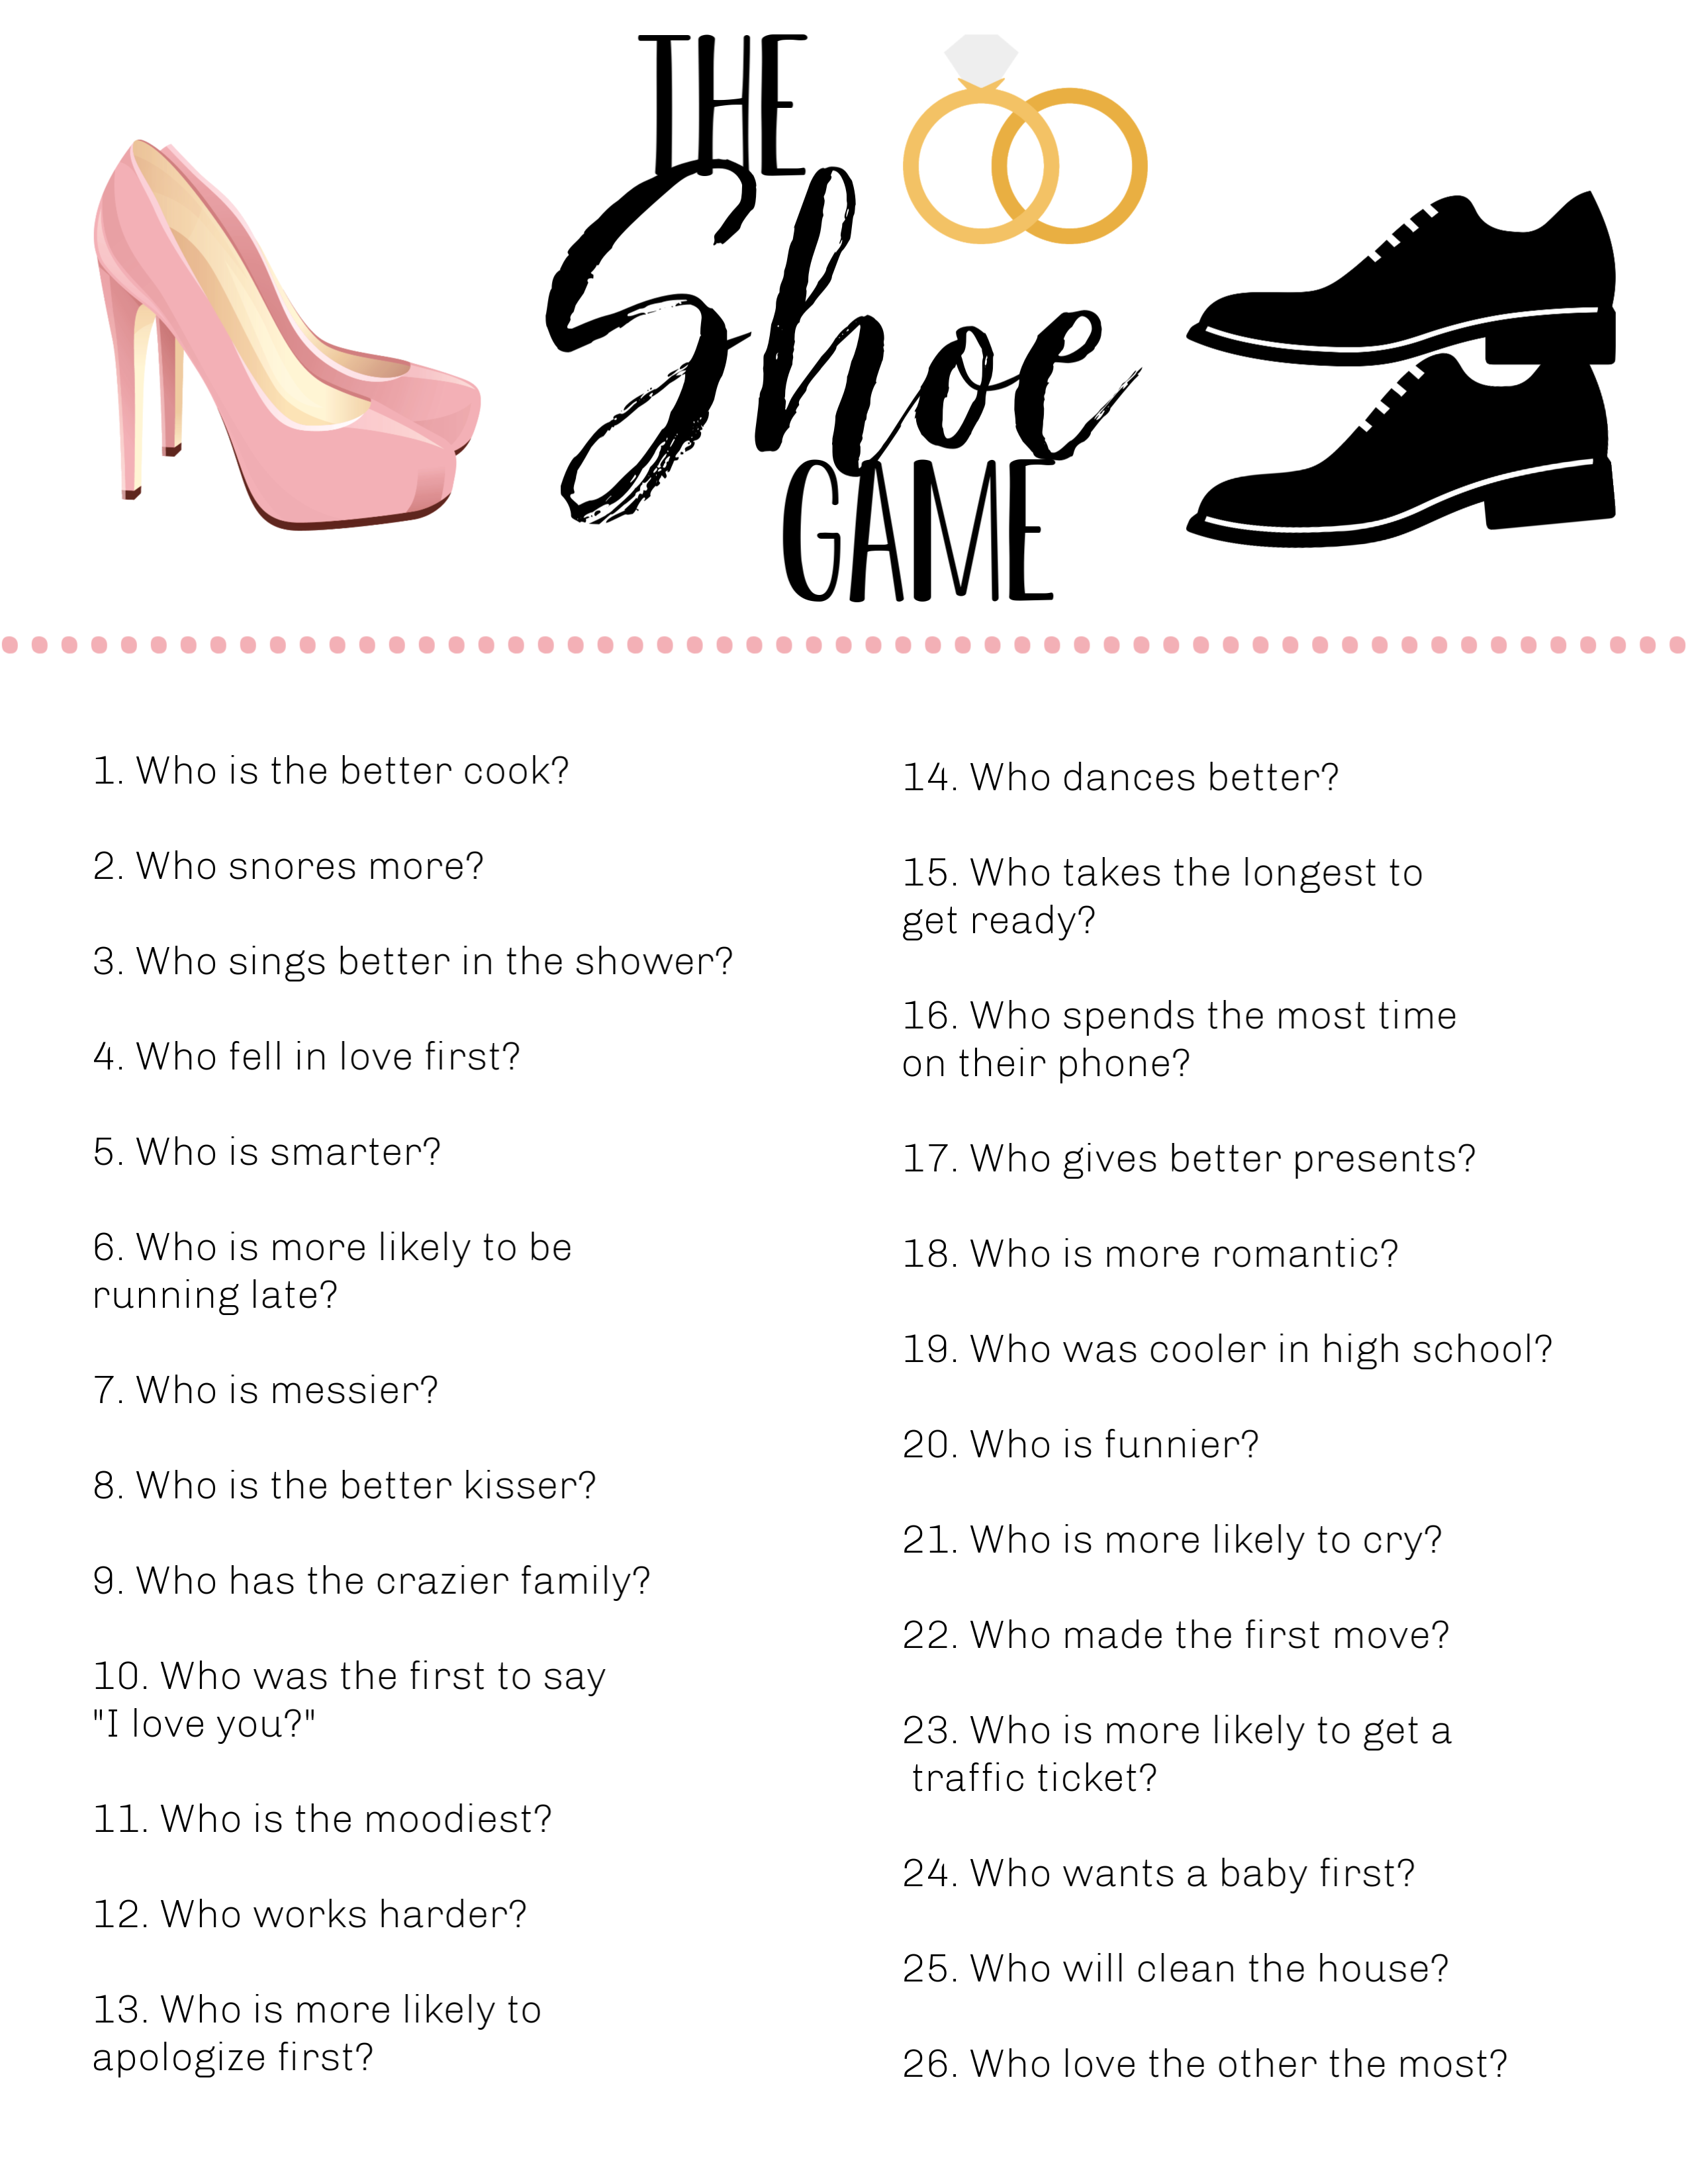 Wedding Shoe Game Printable with Questions to Ask